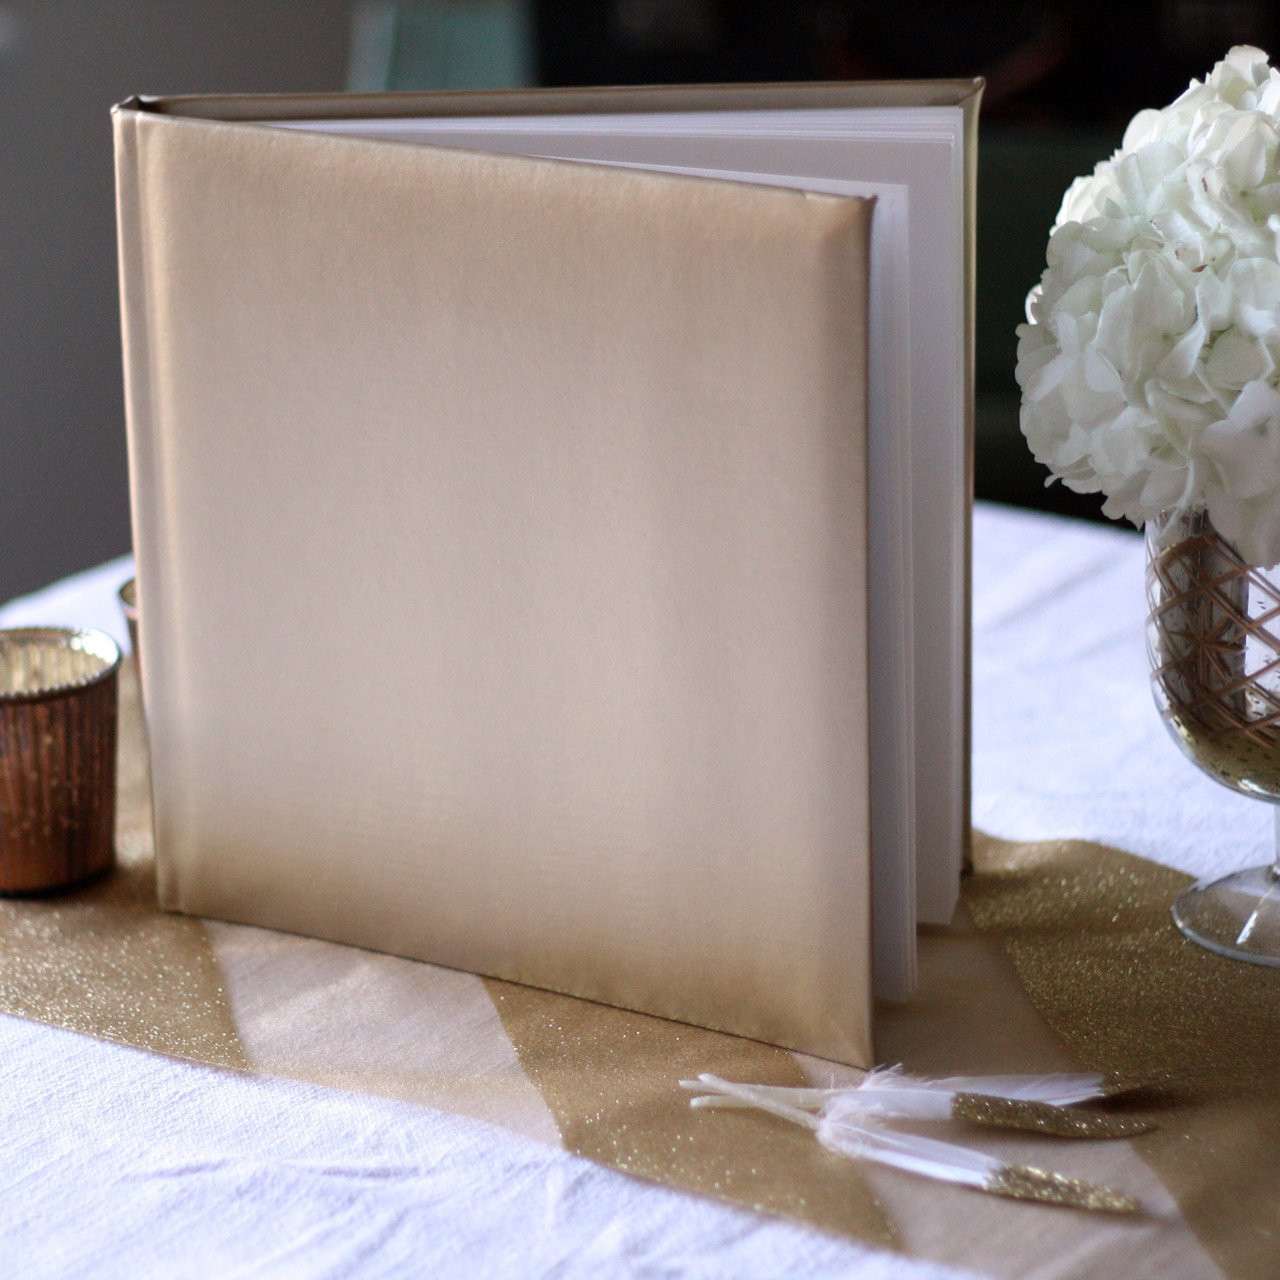 Gold Guest Book Wedding
 Gold Wedding Guest Book – The Wedding of My Dreams